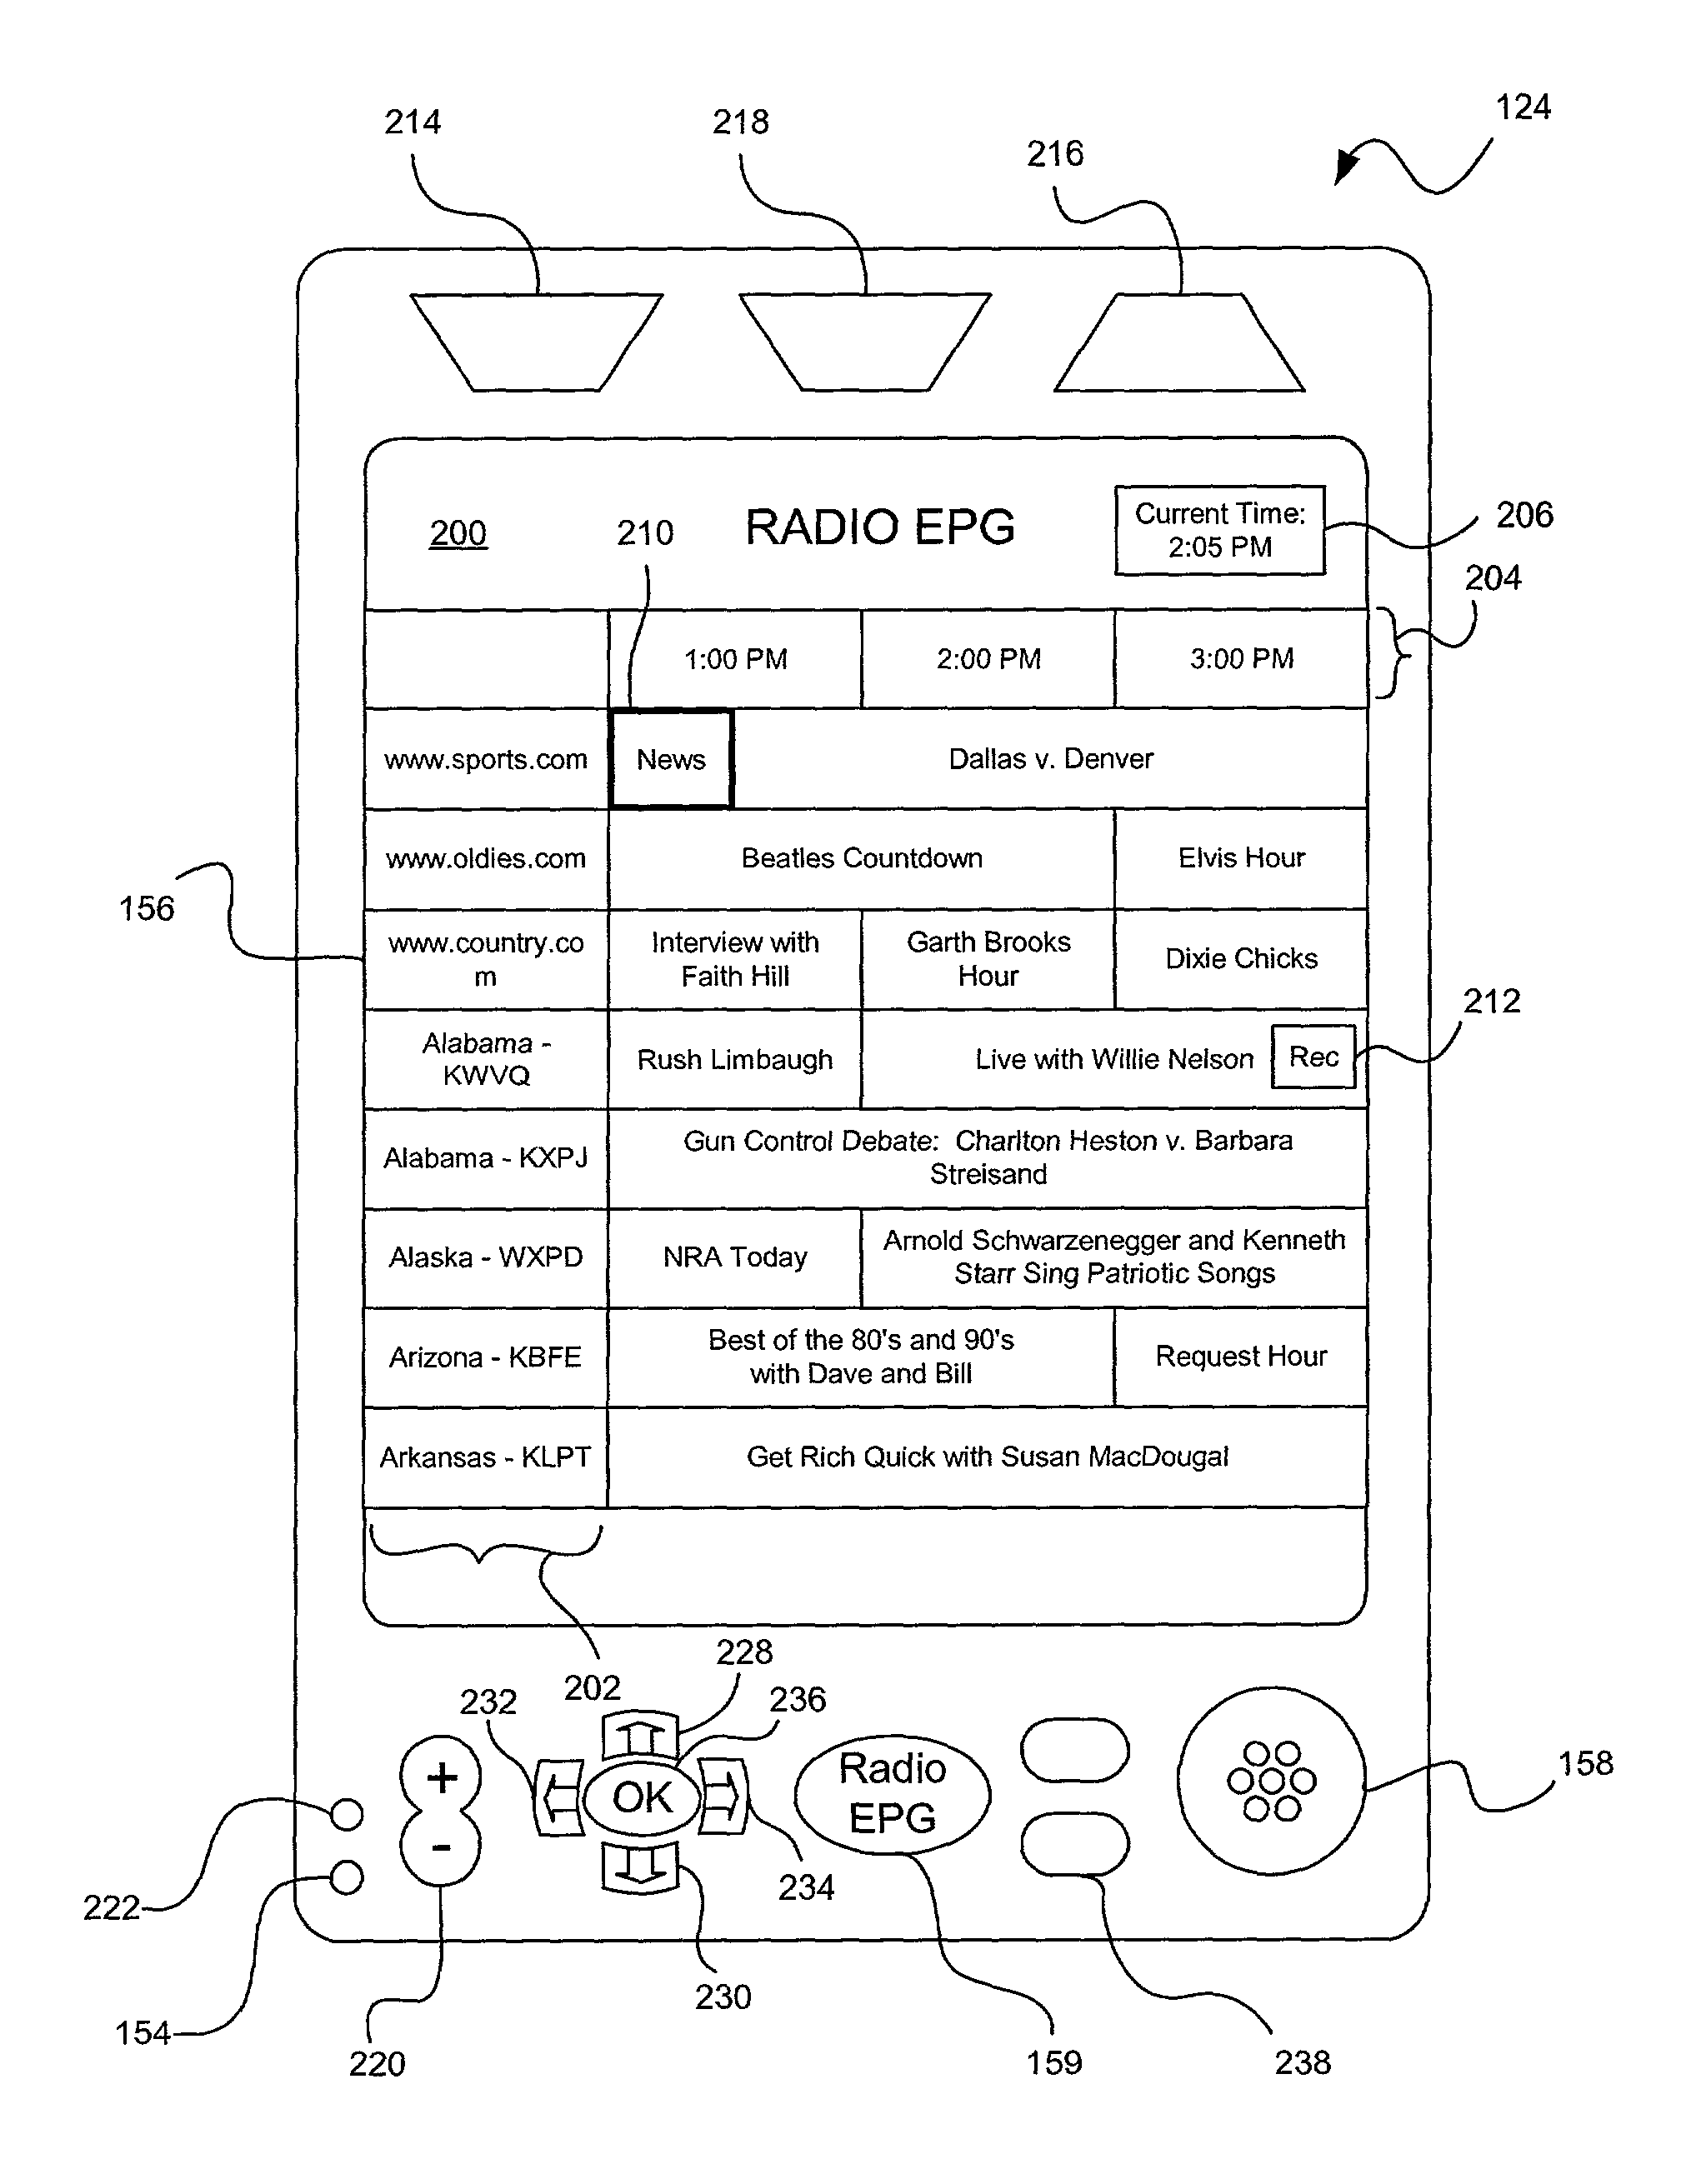 System and method for providing an electronic program guide of live and cached radio programs accessible to a mobile device